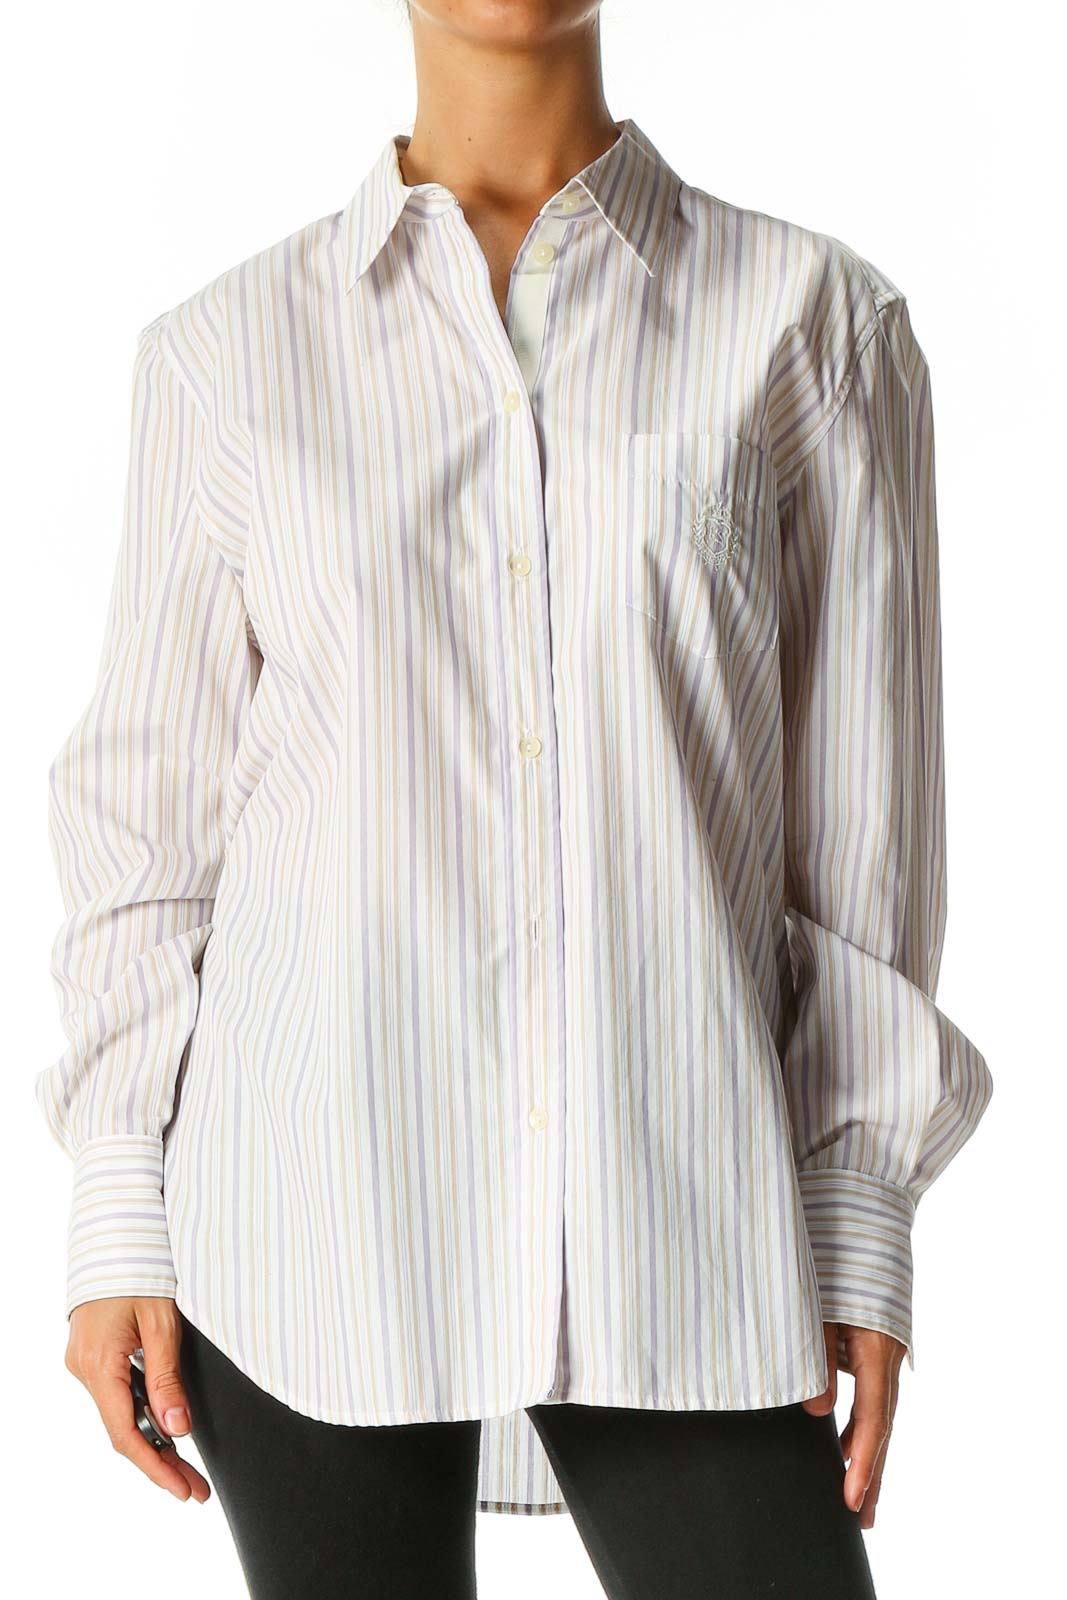 White Striped Formal Shirt Front